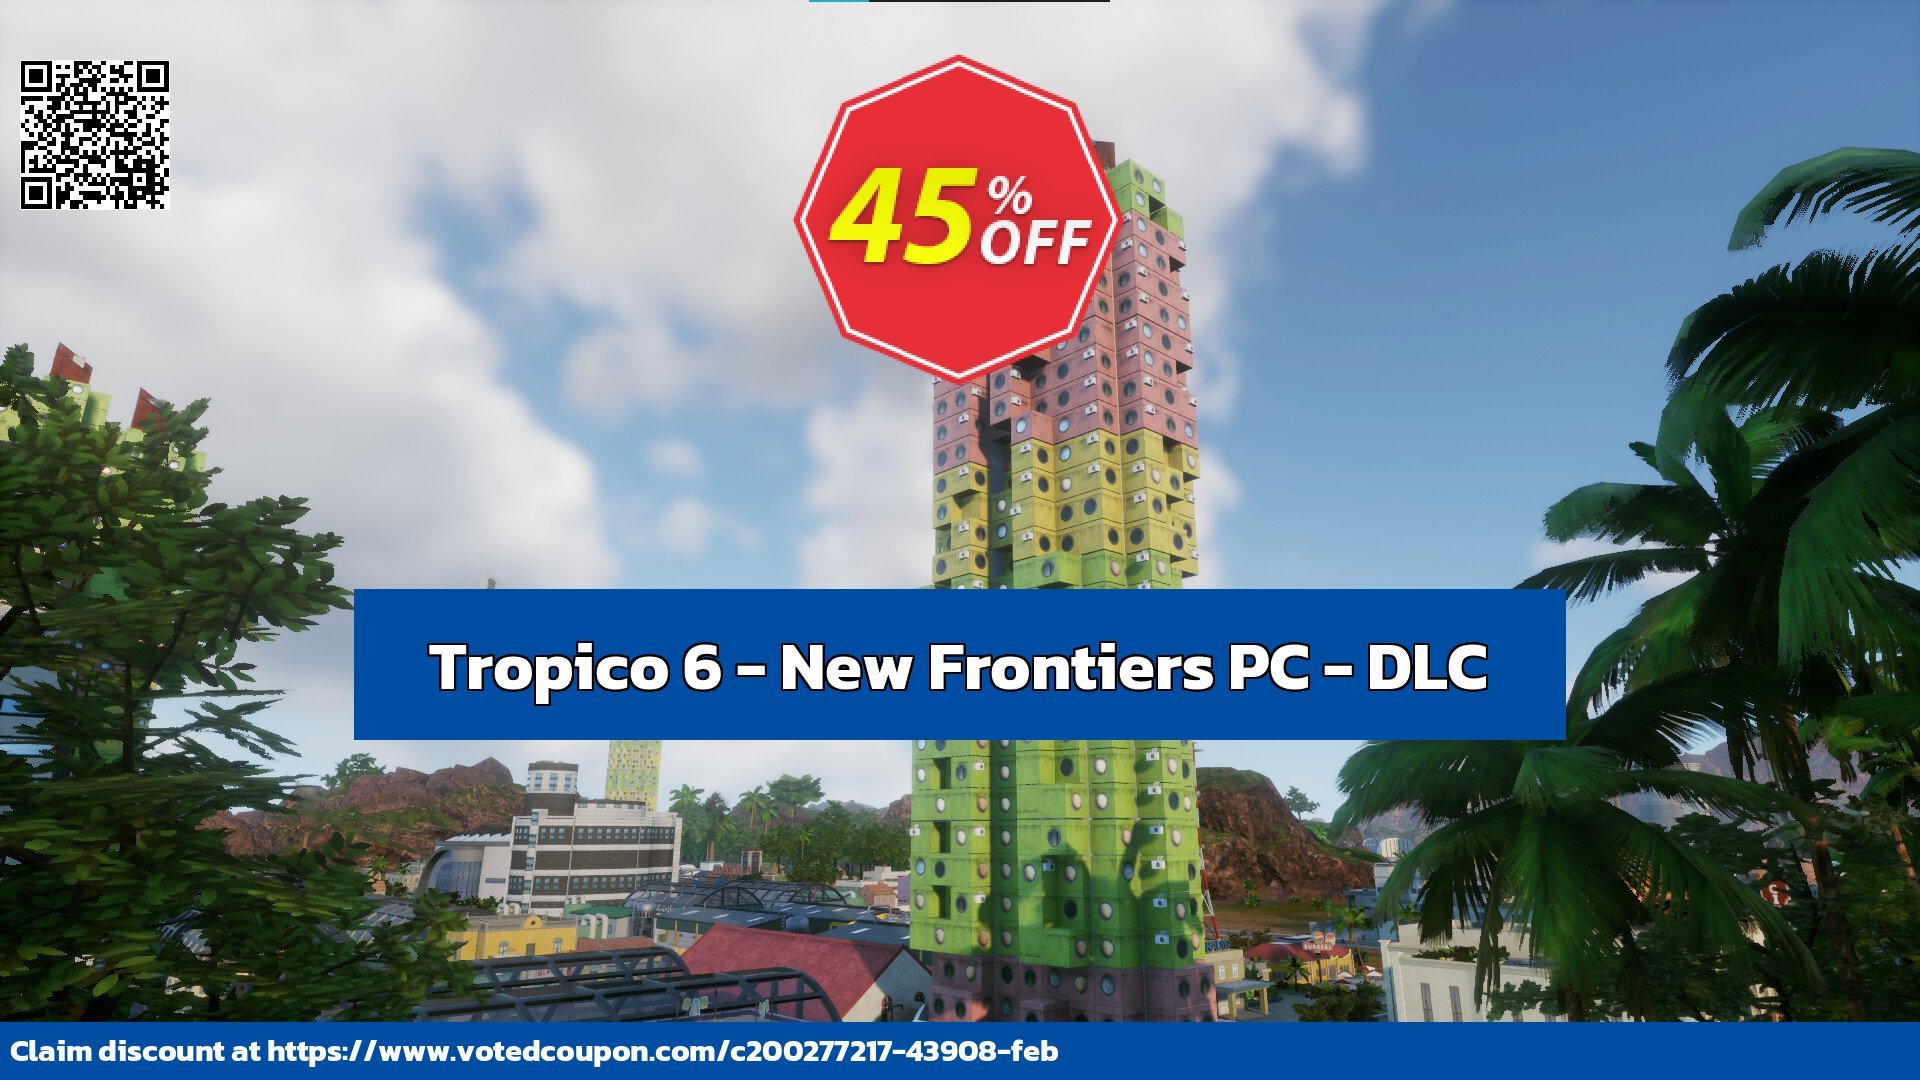 Tropico 6 - New Frontiers PC - DLC Coupon Code May 2024, 50% OFF - VotedCoupon